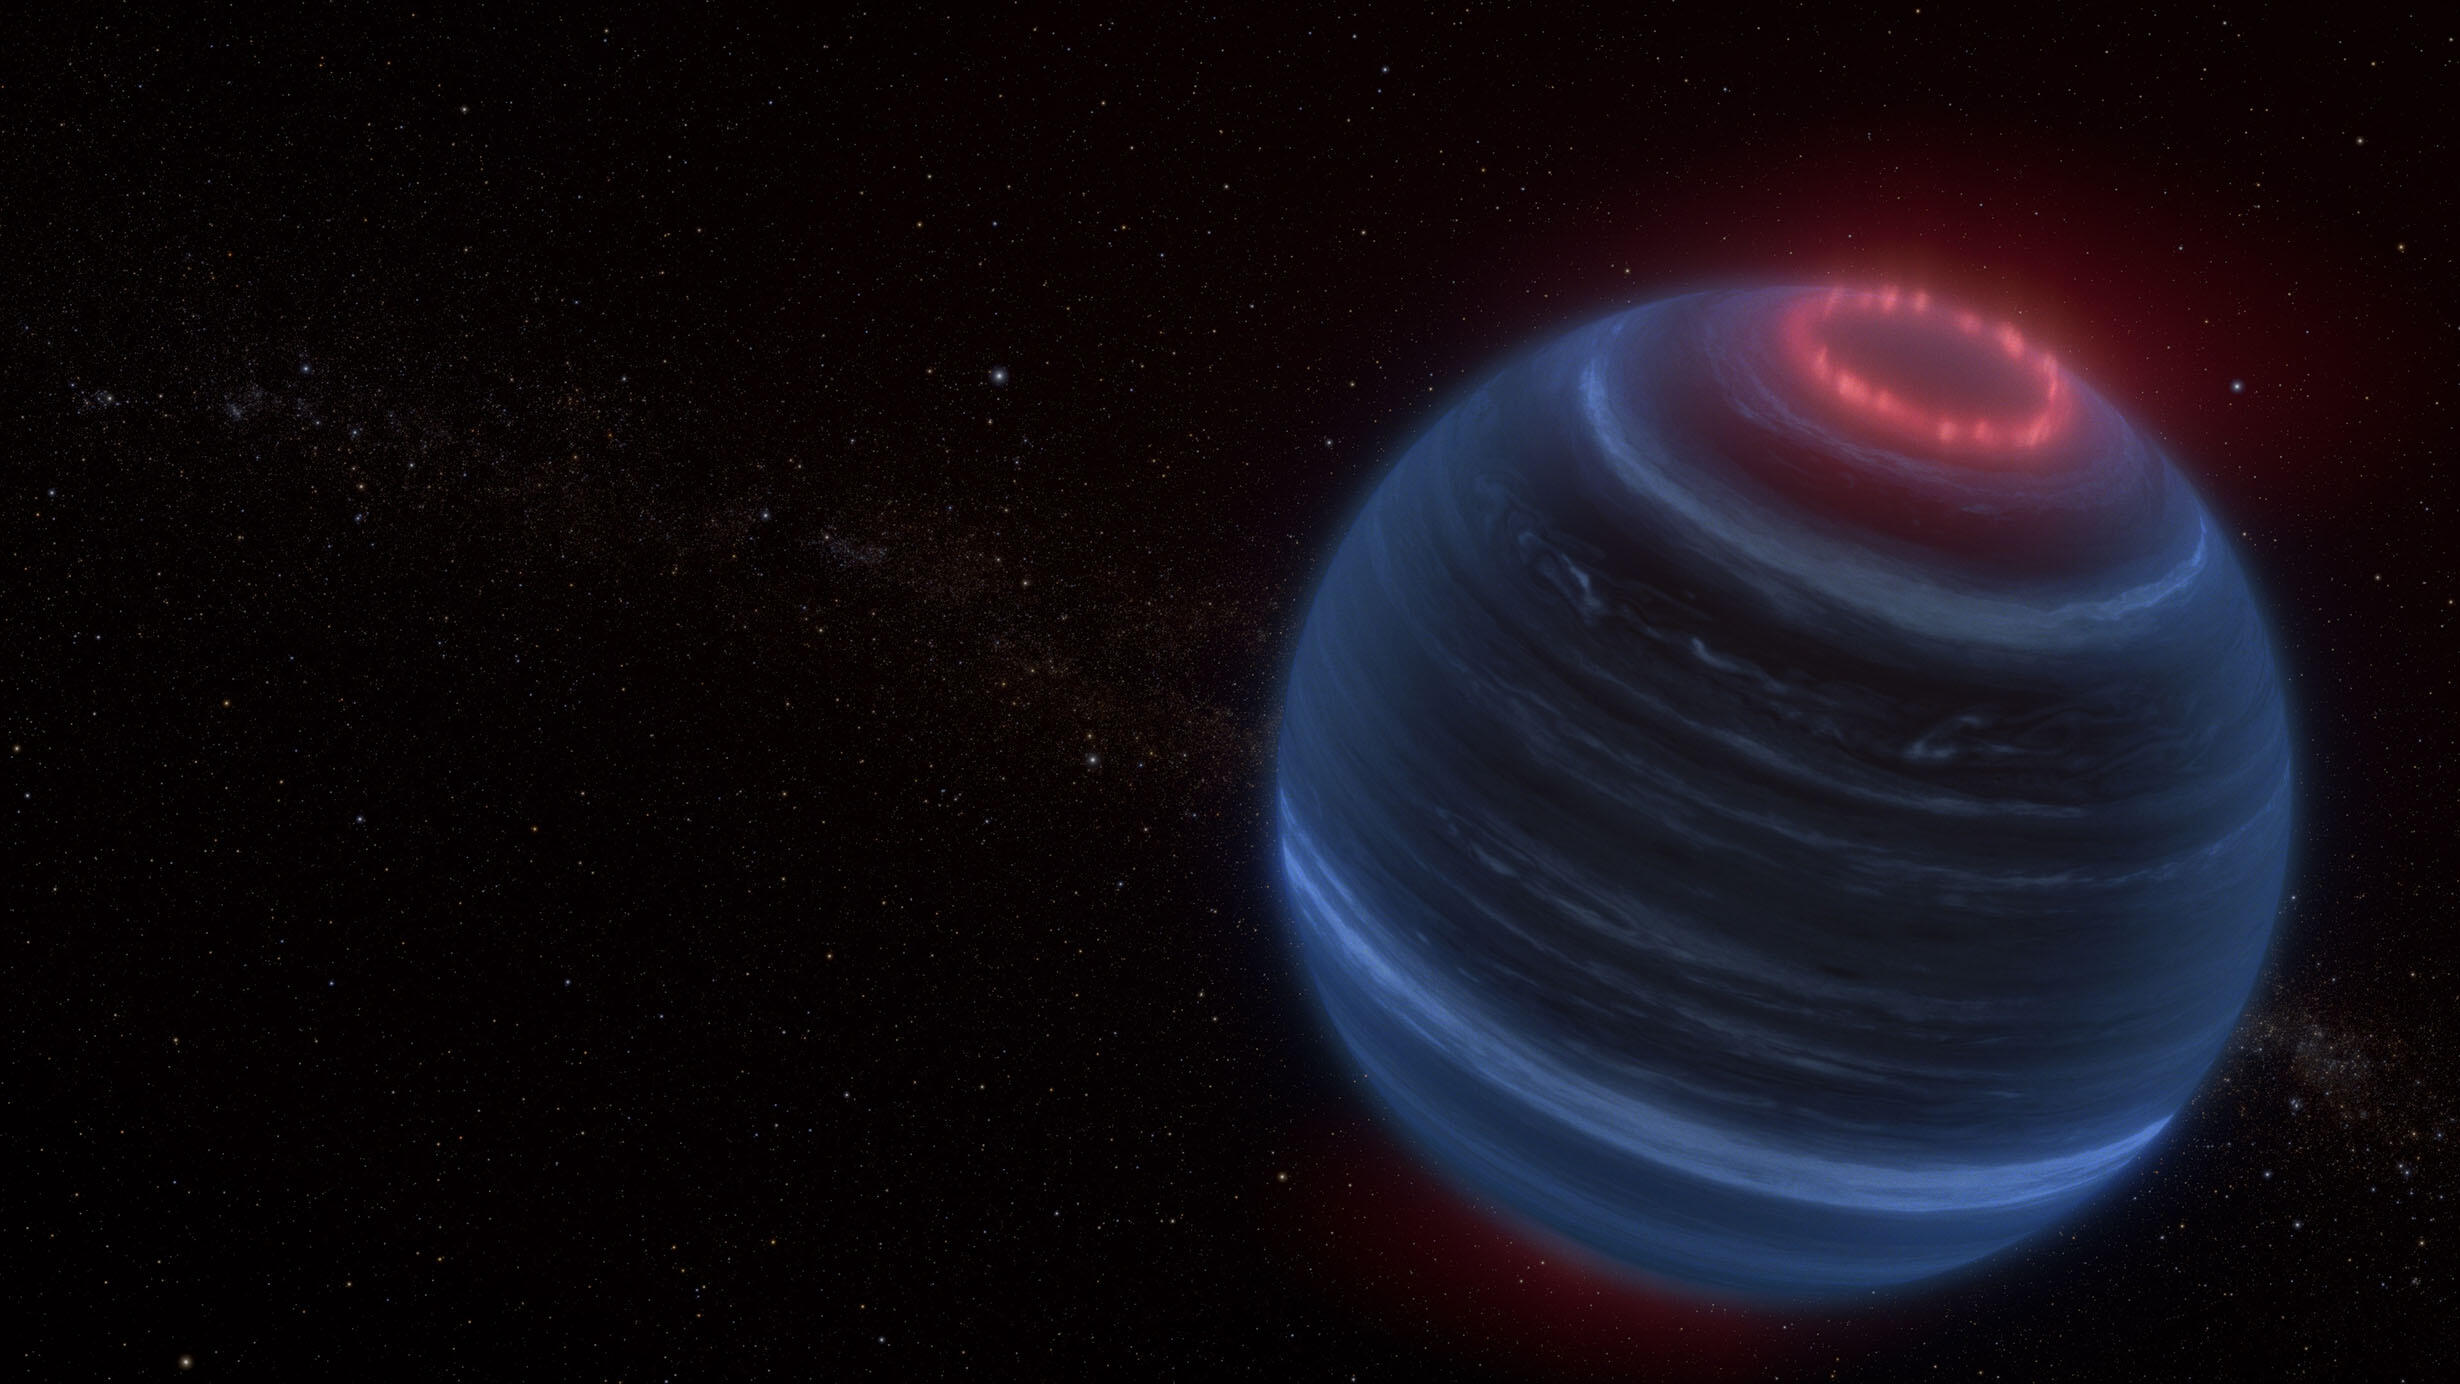 Rendering of a brown dwarf emitting methane, conceptualized as a brightly colored glow on top of the sphere, in space.